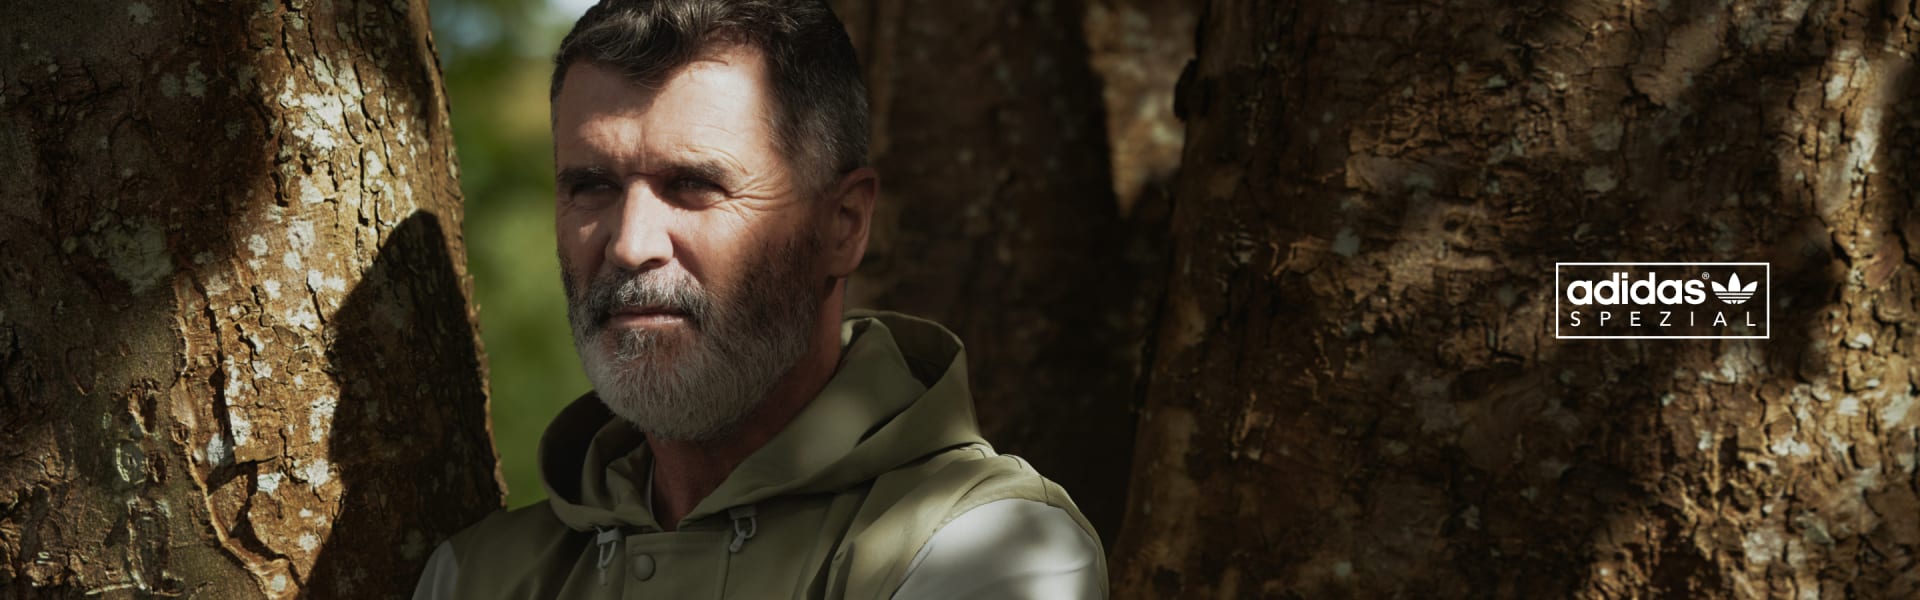 Roy Keane leans on a tree with crossed arms and a slight smile, hiding from the sun in a green and gray Spezial jacket.